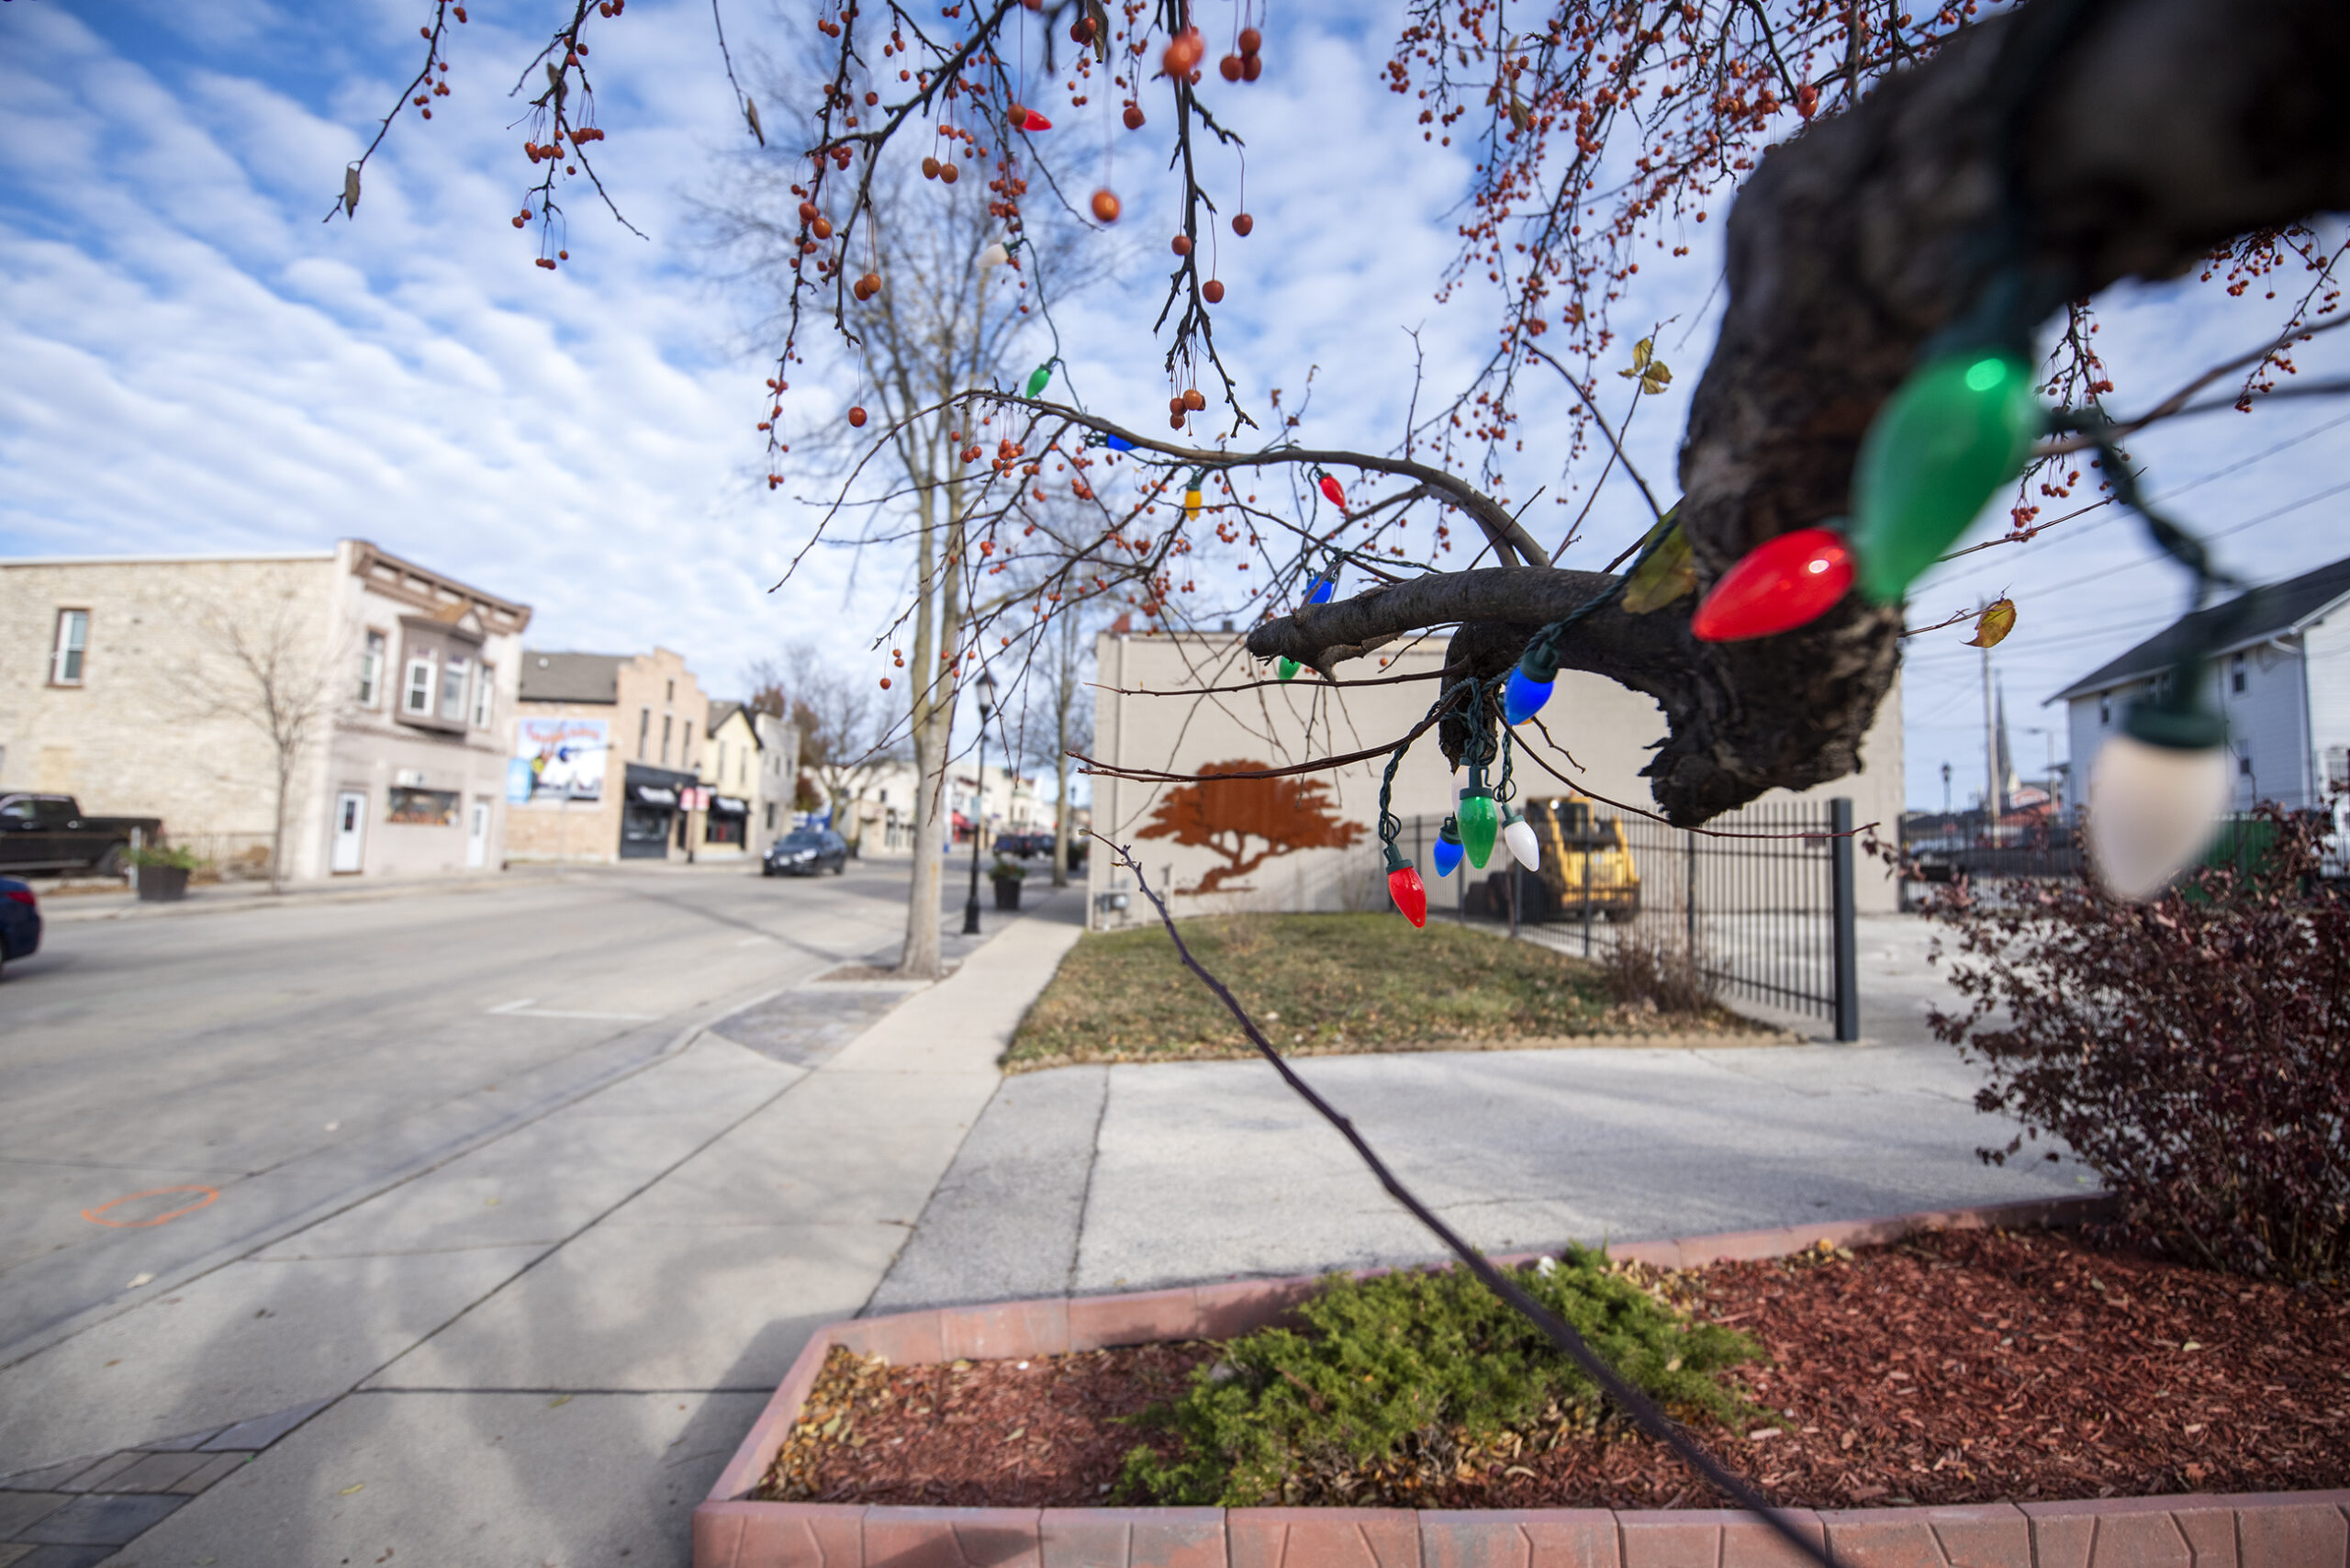 Colorful Christmas lights can be seen on Main Street in Waukesha under a blue sky.